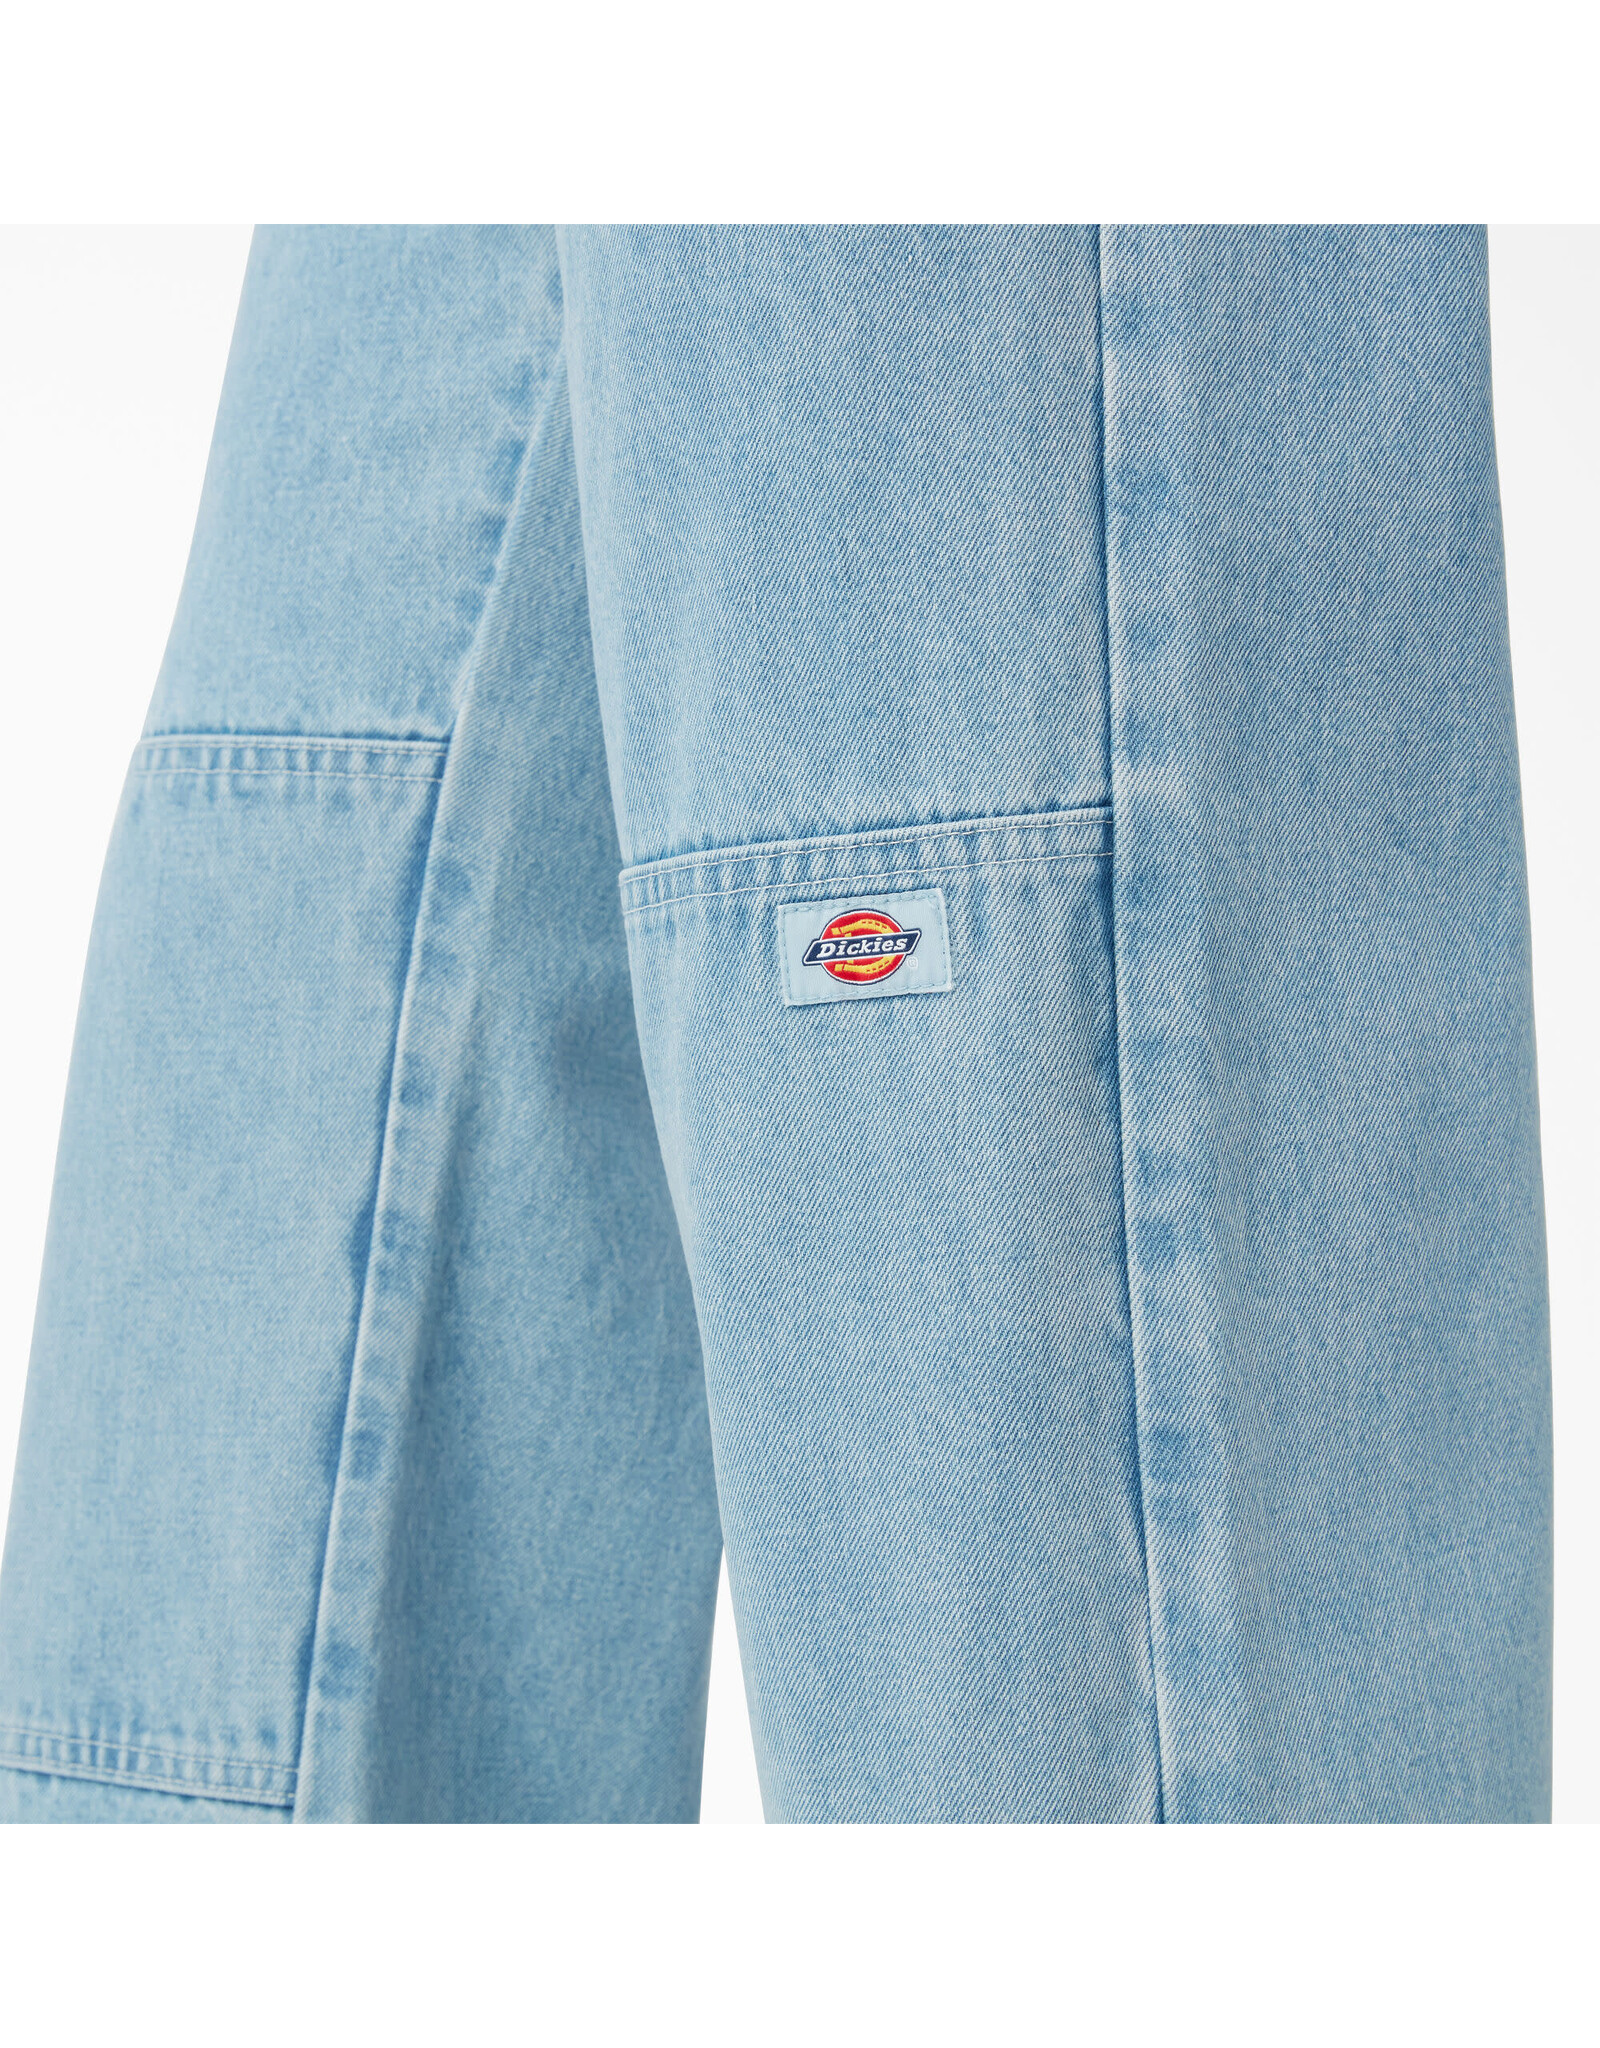 DICKIES Loose Fit Double Knee Jeans Light Blue Washed Denim - DUR05LTD